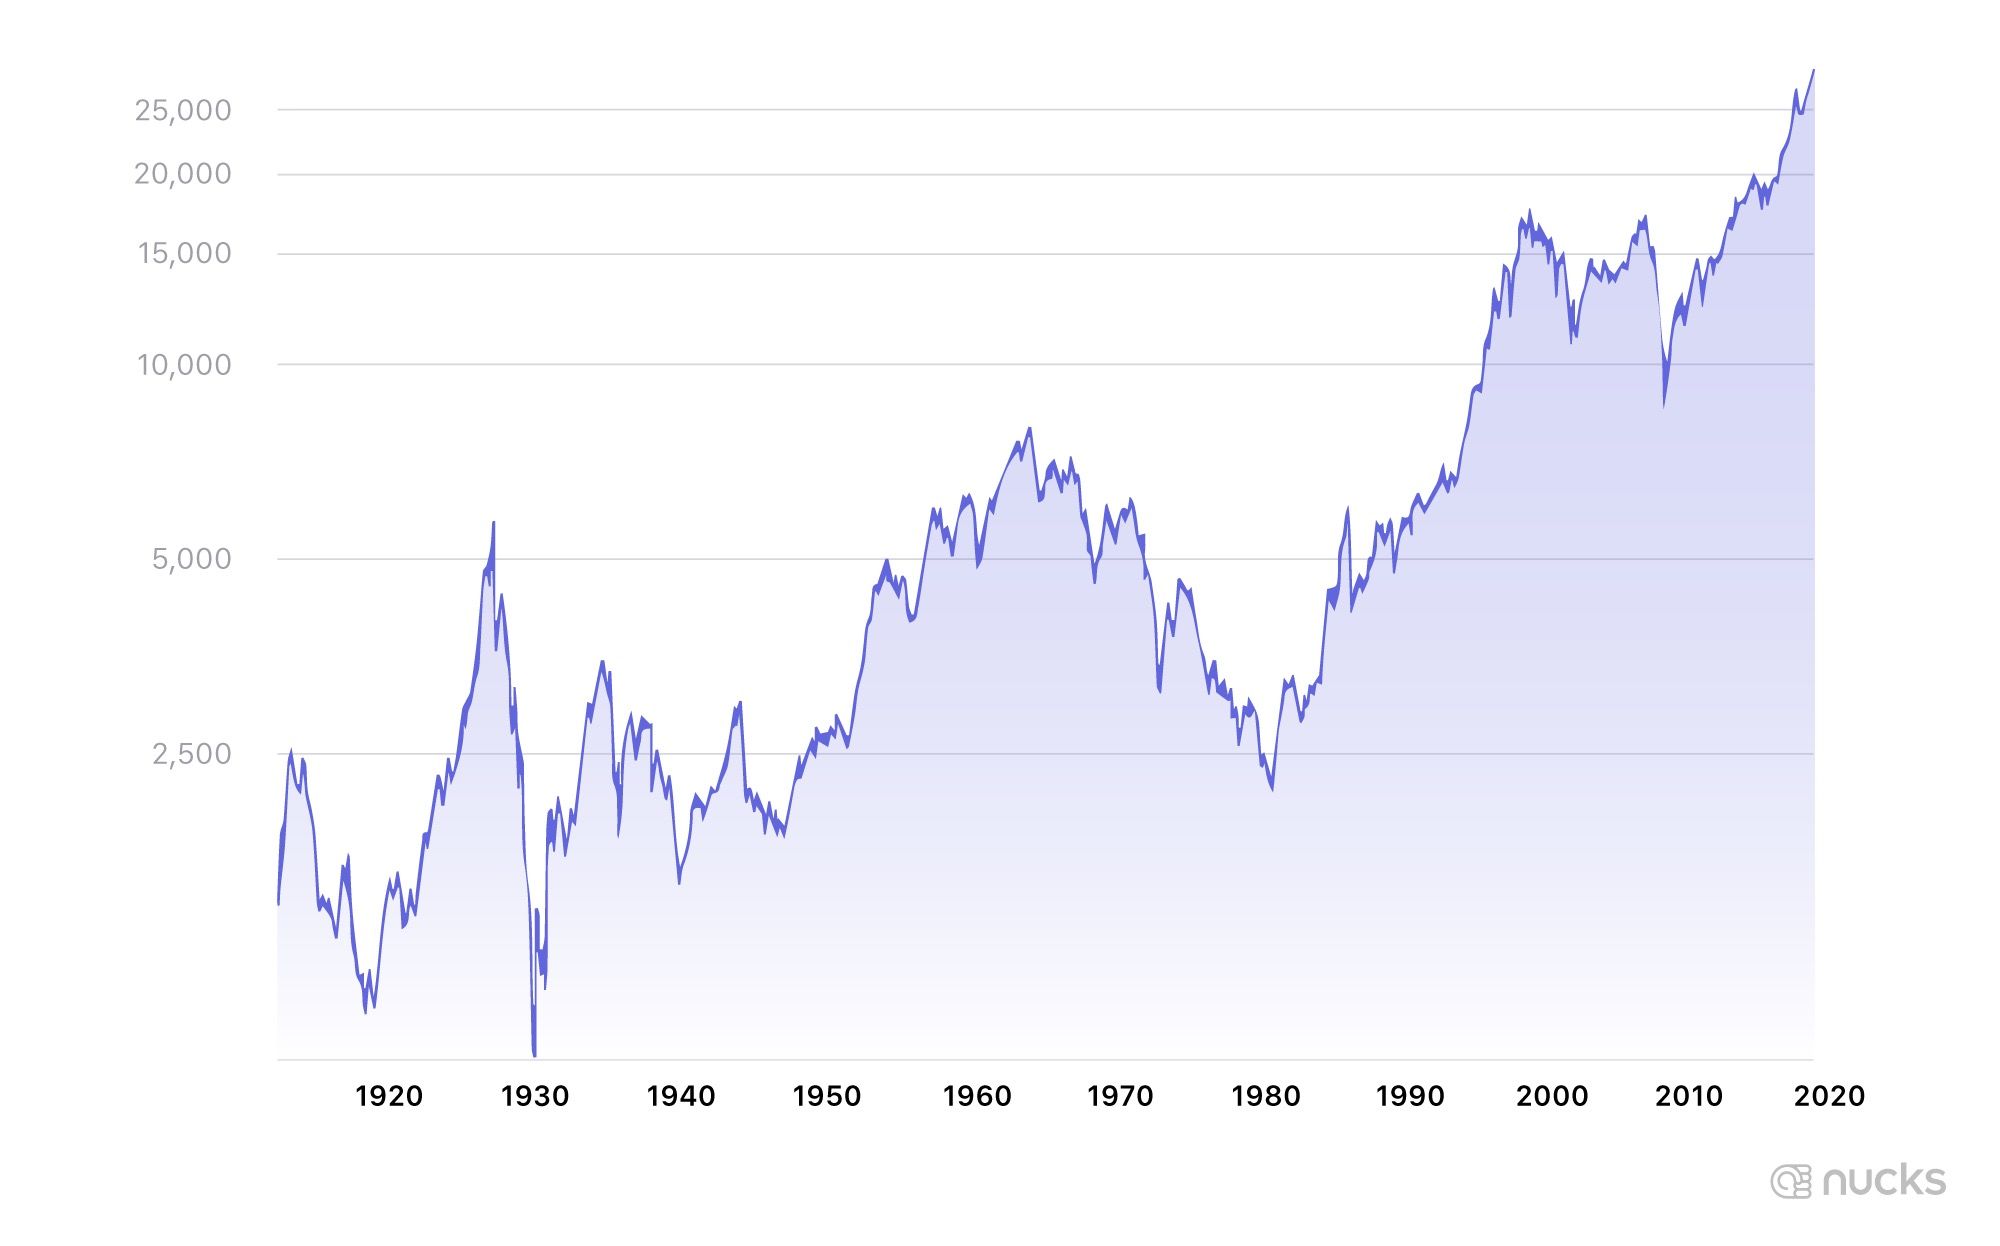 The stock market over the last 100 years.